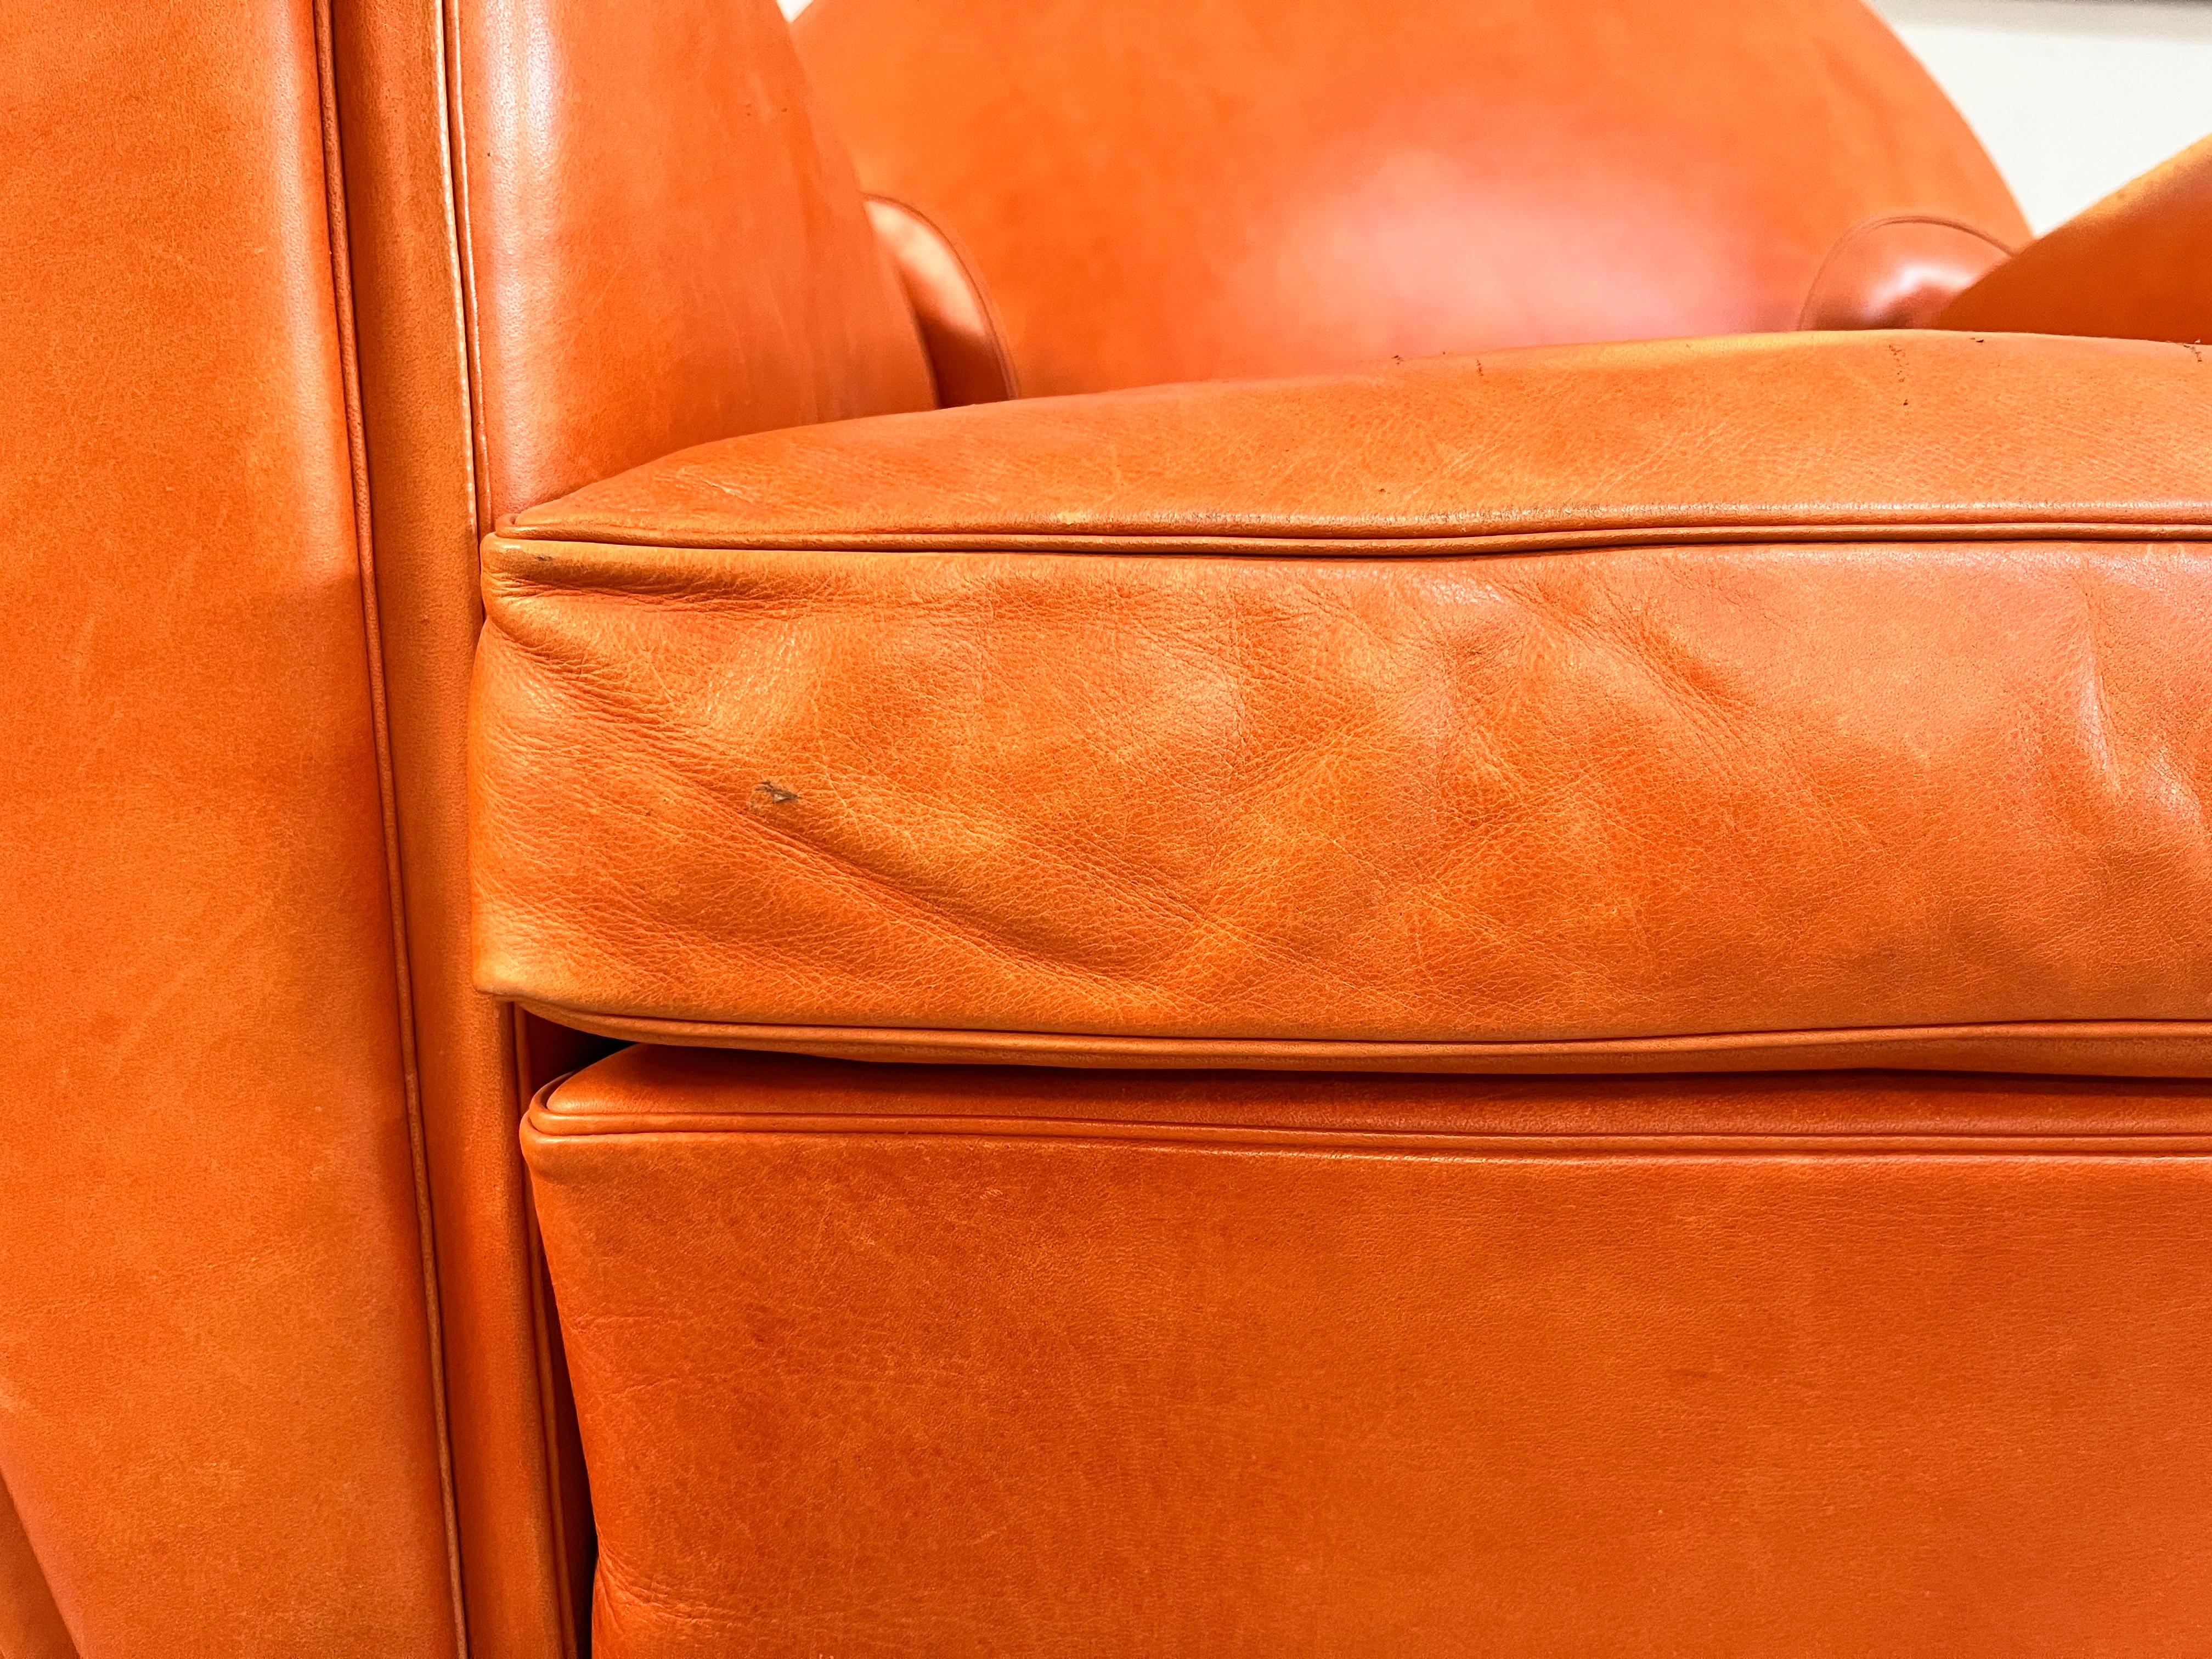 Produced by Poltrona Frau, this armchair is one of the world's best-known design icons: an iconic armchair made in a limited and numbered edition. Upholstered in precious Nubuck leather, finished in shades of orange. The product is embellished with